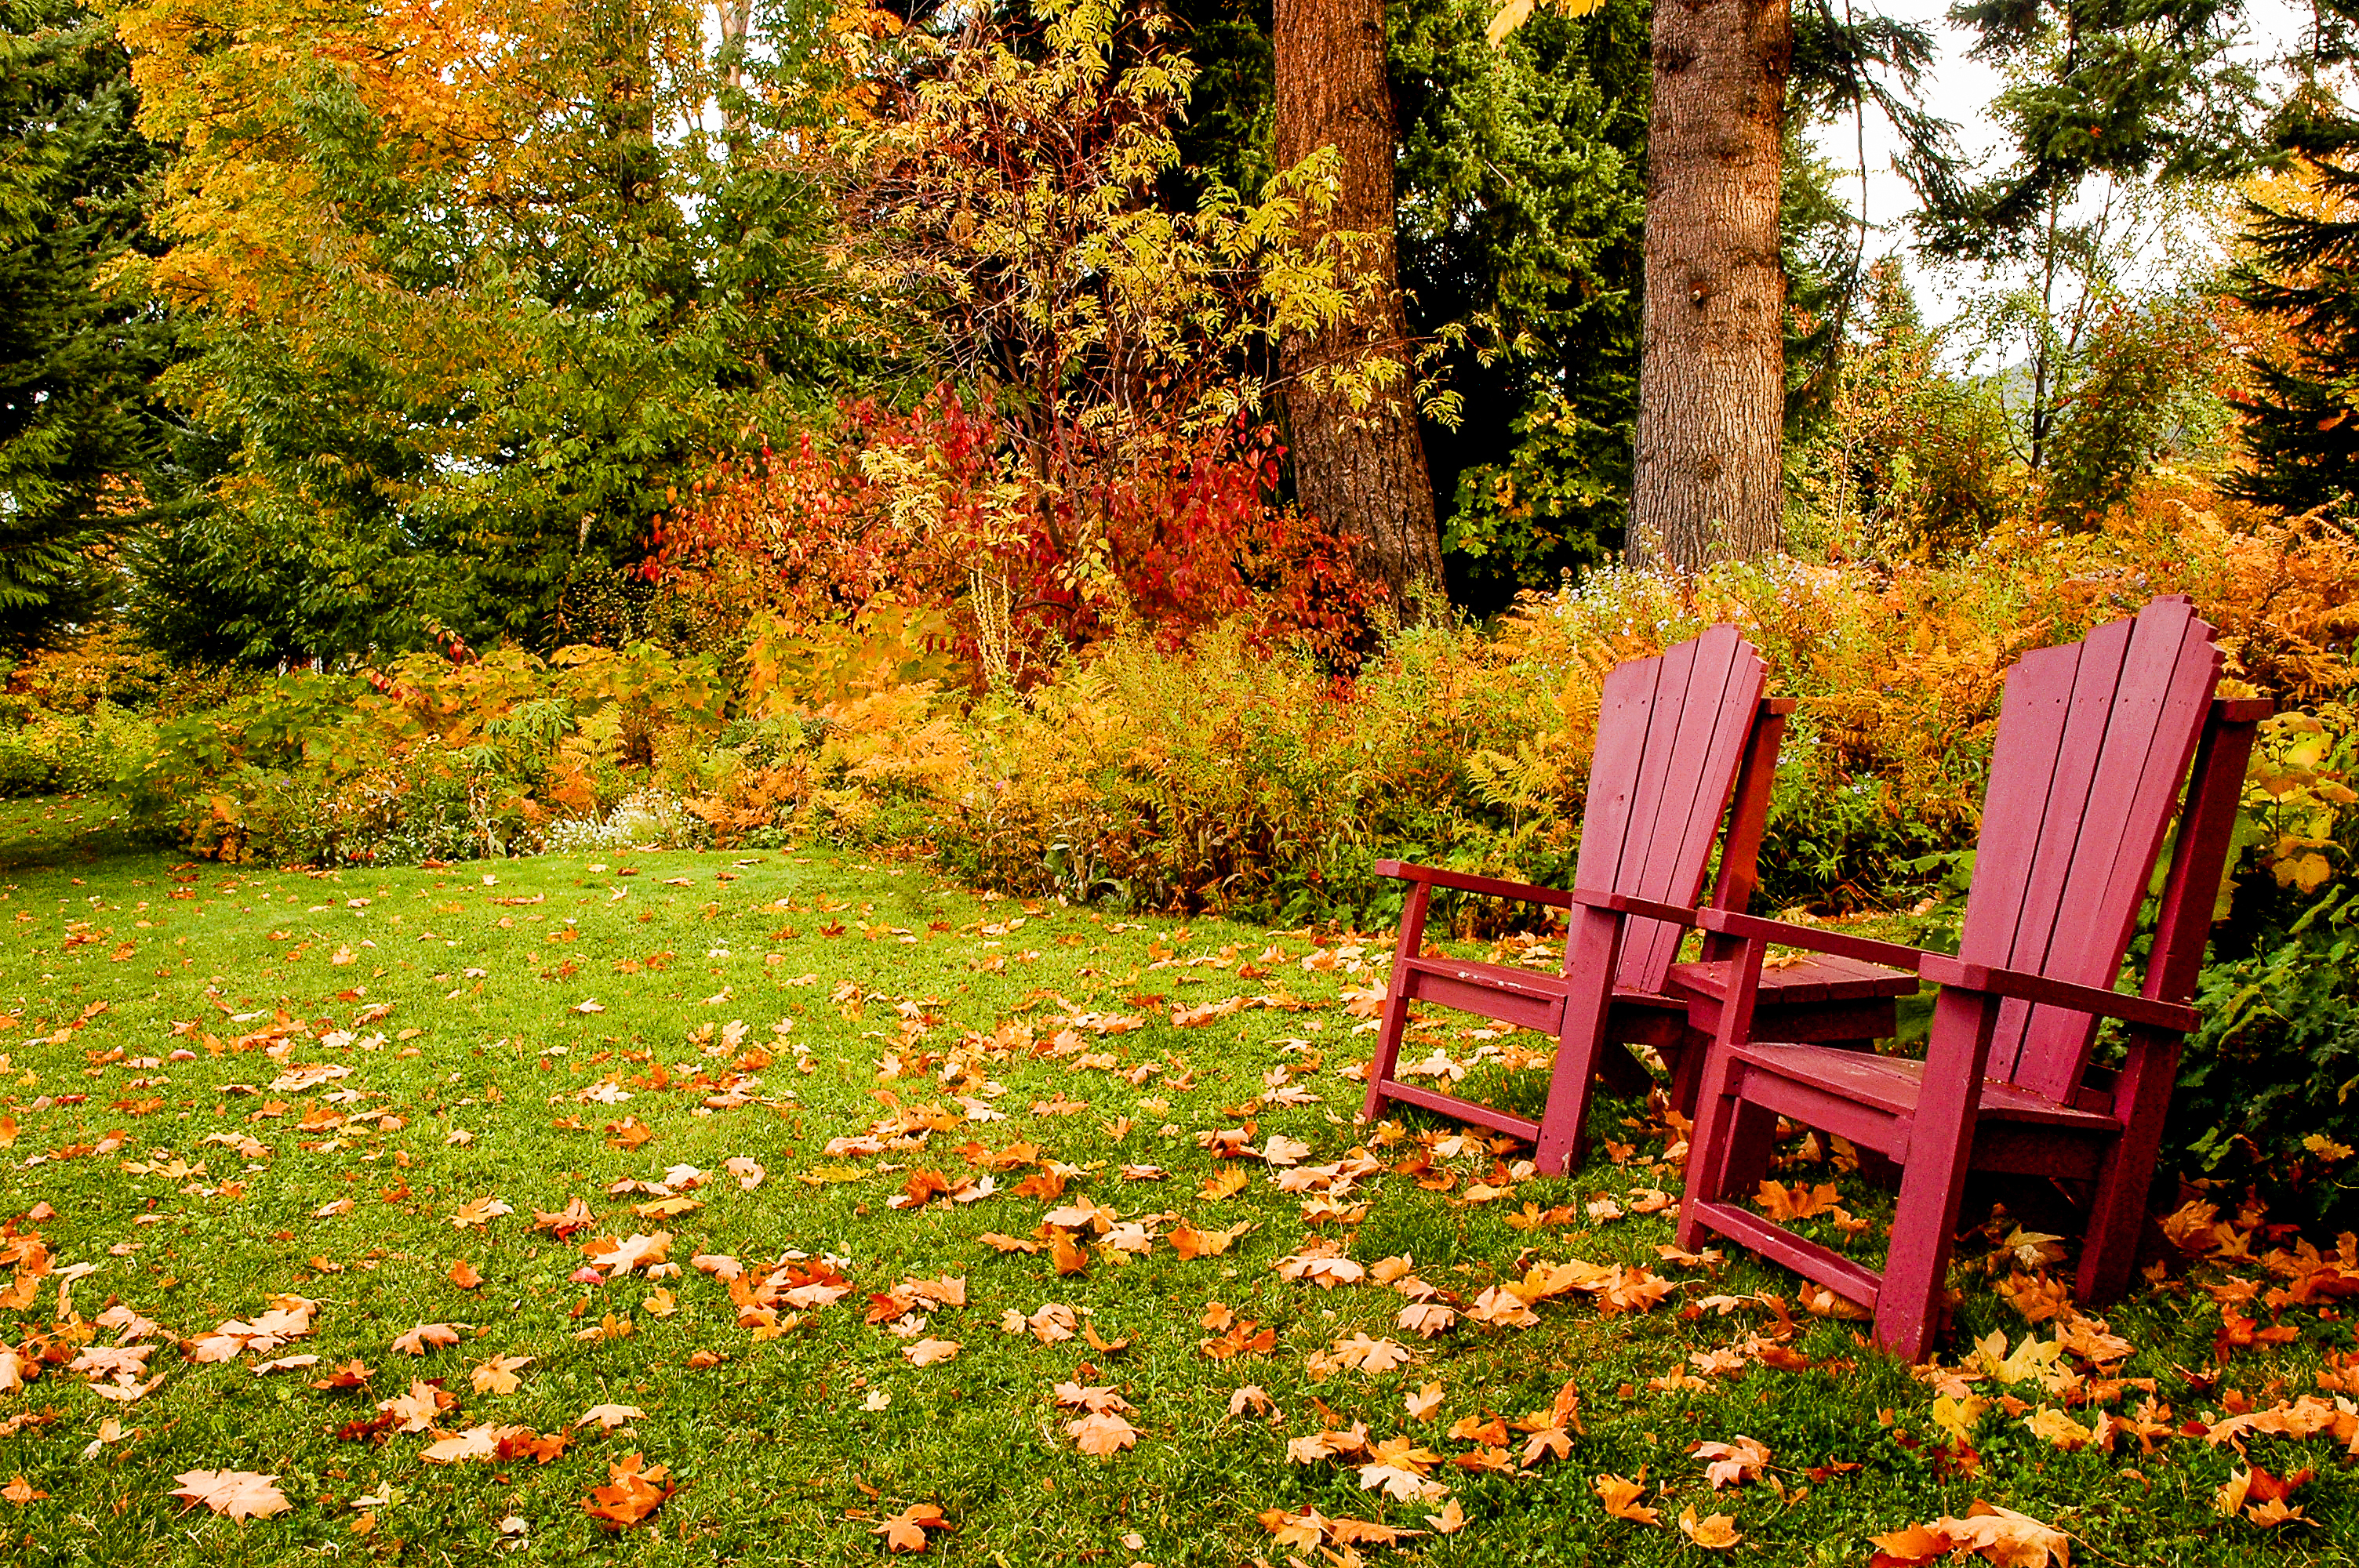 red chairs on autumn lawn with fallen leaves